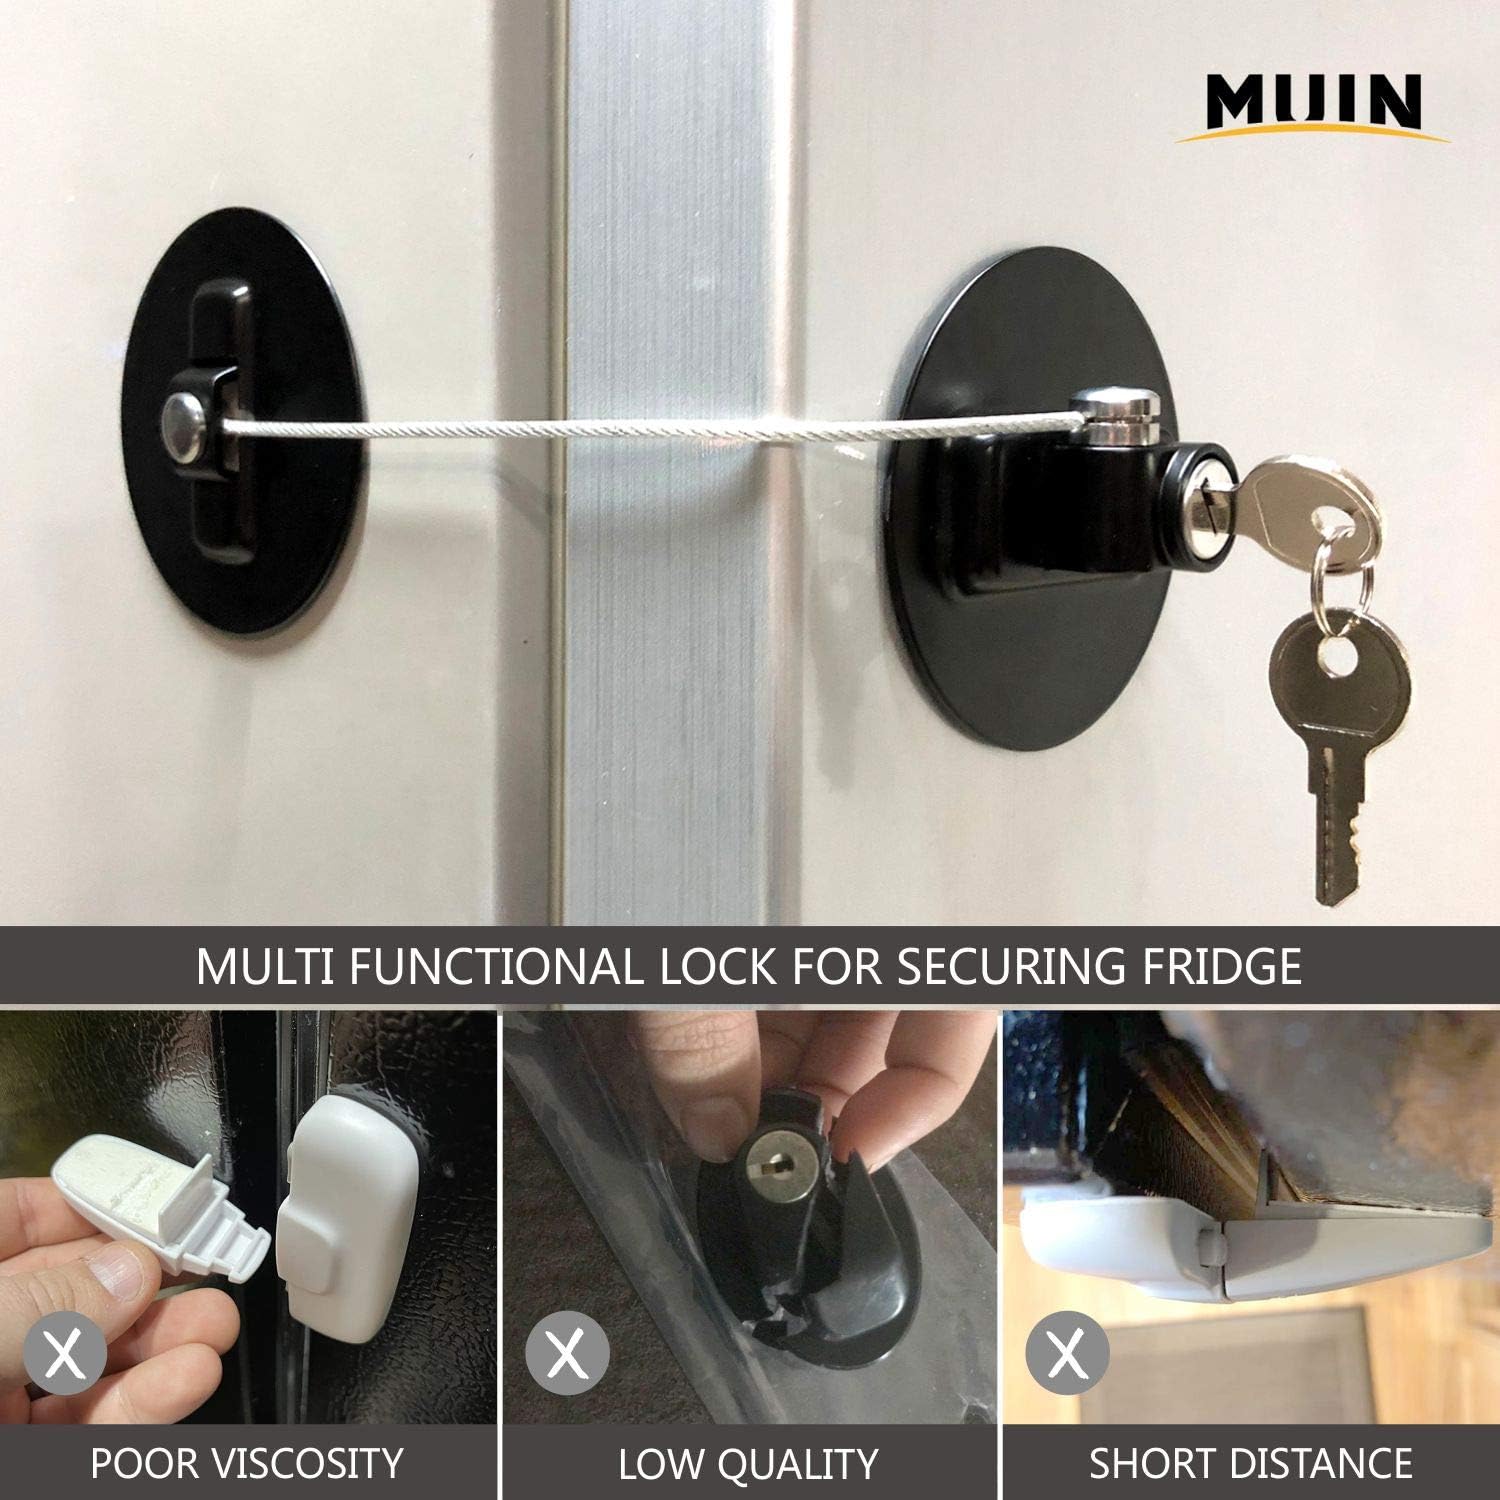 MUIN Highly Secured Refrigerator Lock with Key &#226;&#128;&#147; Mini Refrigerator Door Lock for Children and Adults